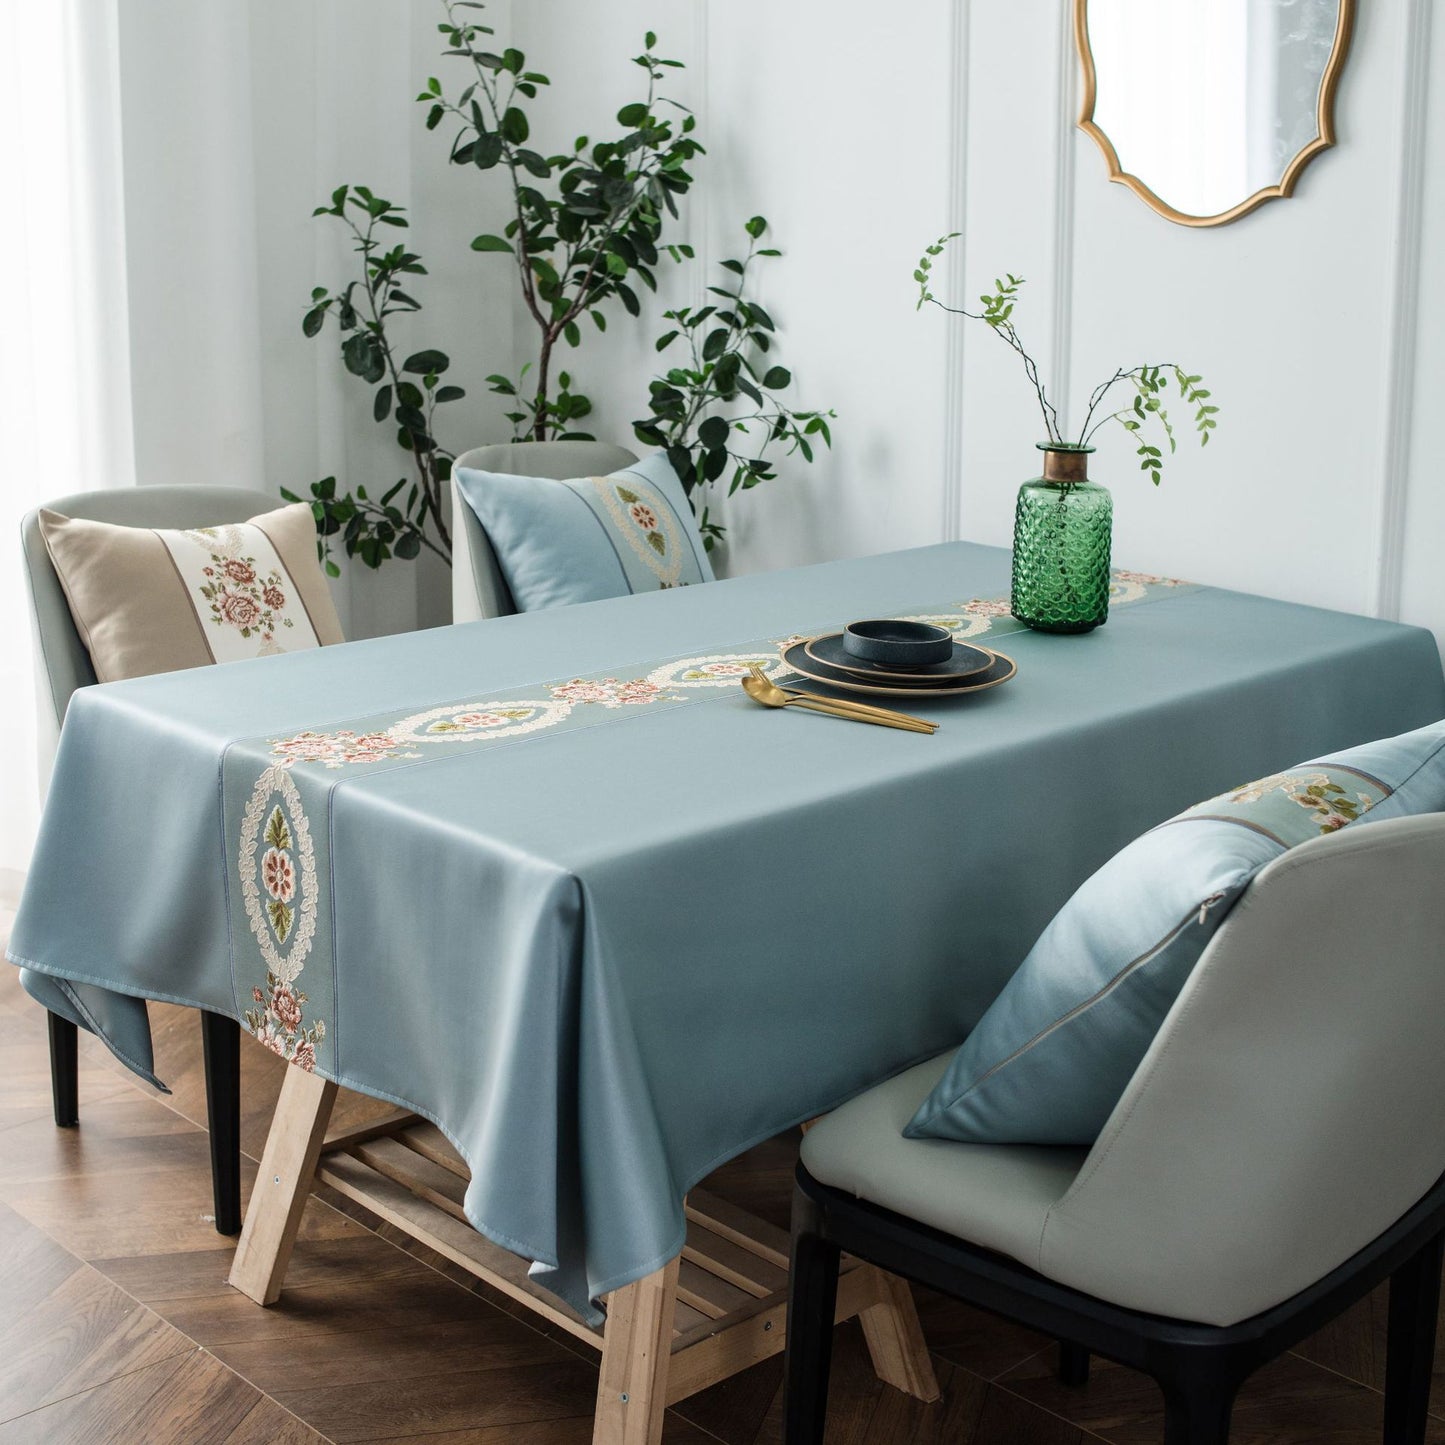 Water-proof Rectangle Restaurant Tablecloth European Luxury Embroidery Table Cloth 100% Polyester Solid Color For Home Party